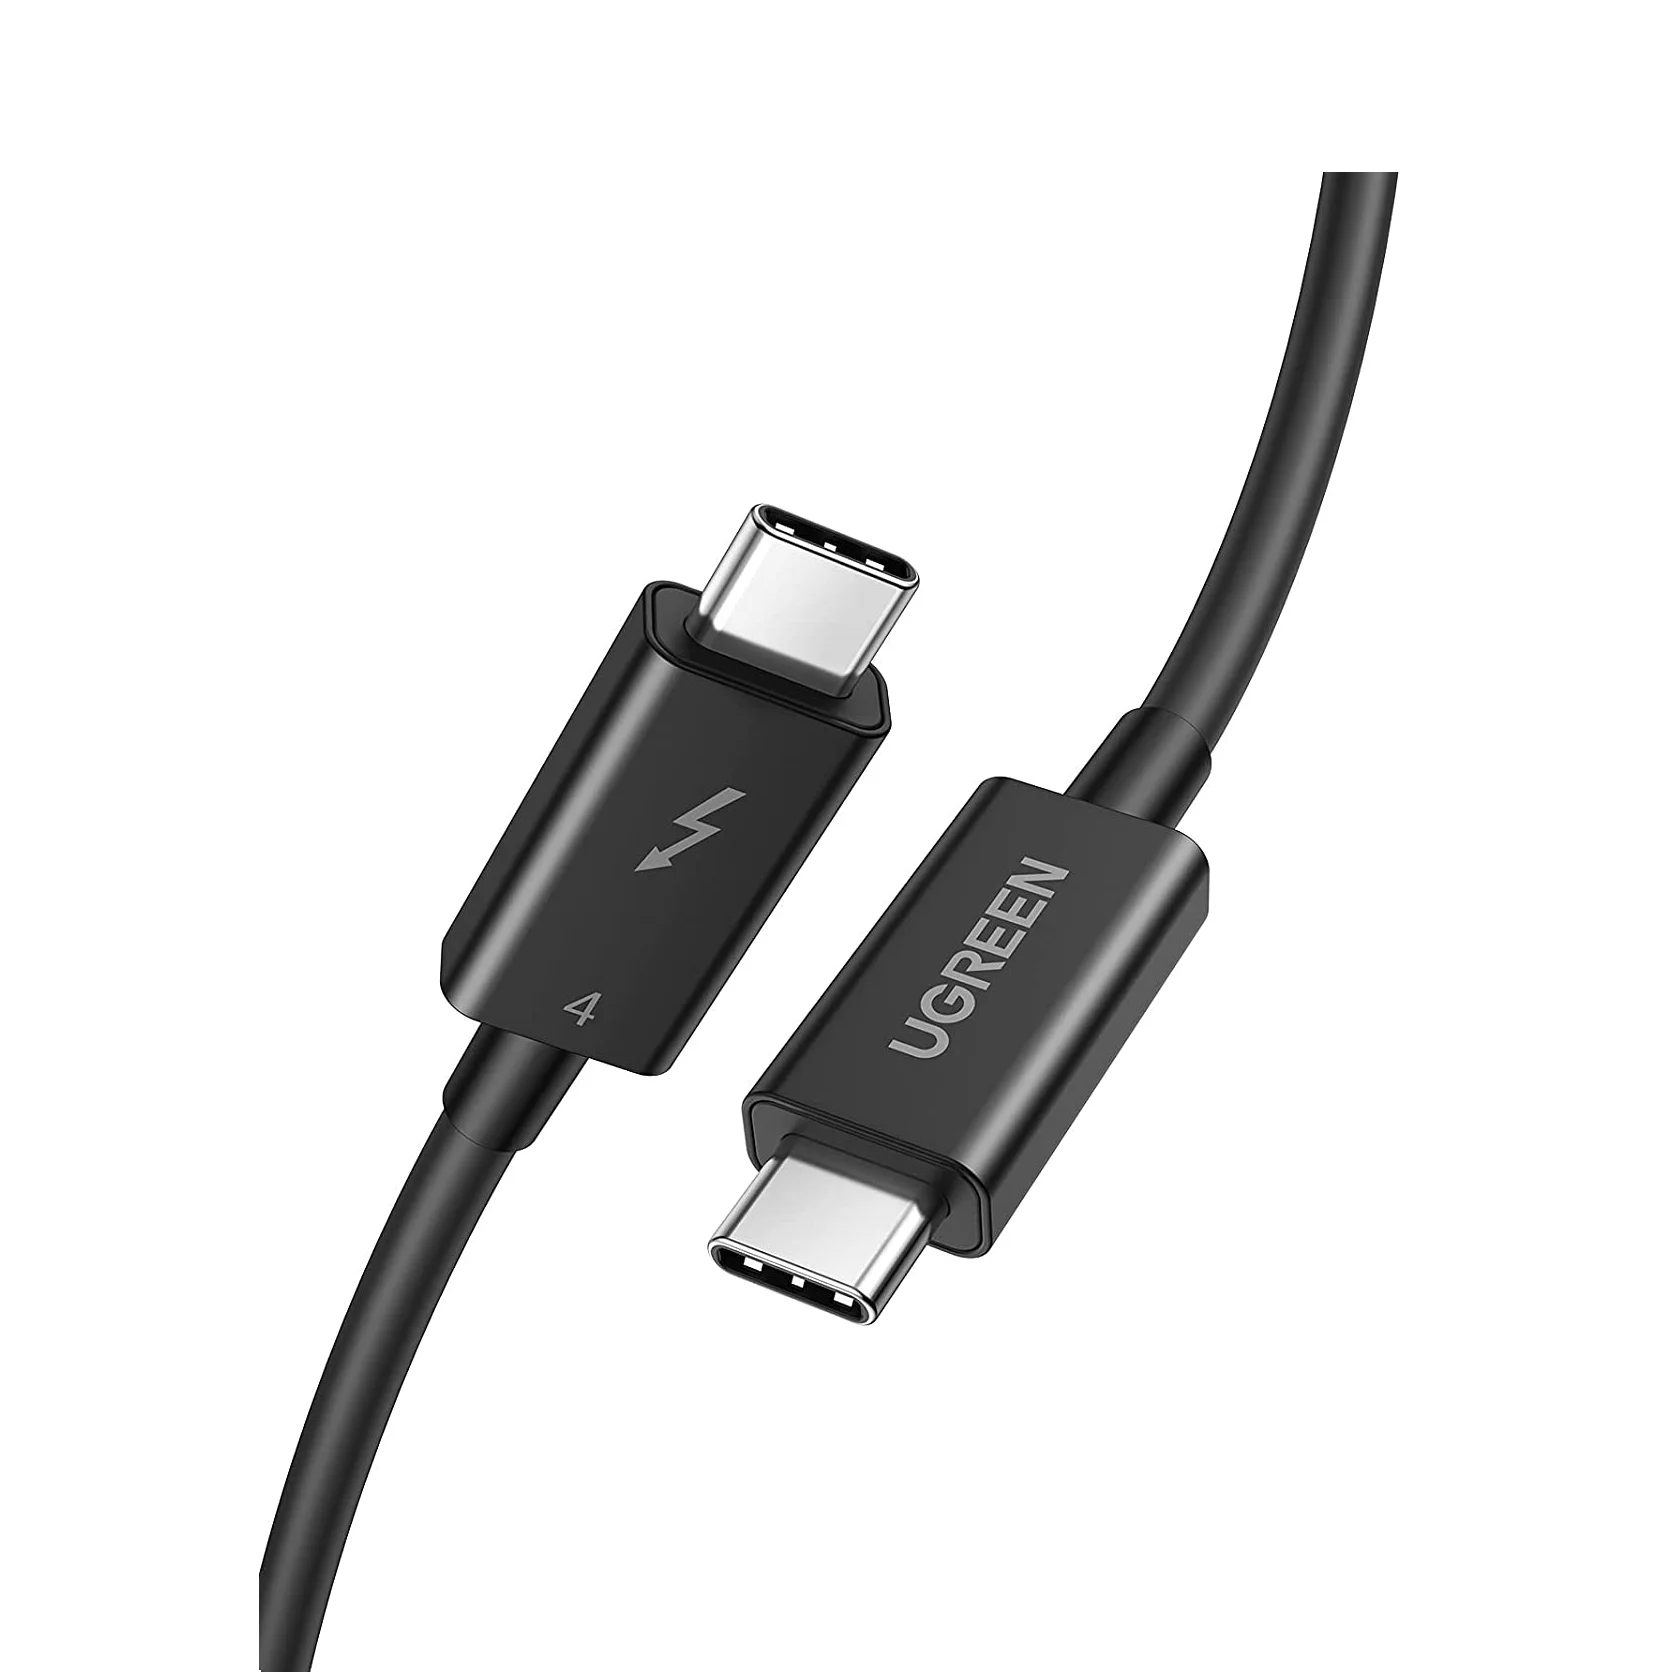 

UGREEN Thunderbolt 4 Cable 2.6FT USB-C to USB-C Cable with 100W Fast Charging and 8K Video Compatible with Thunderbolt 3